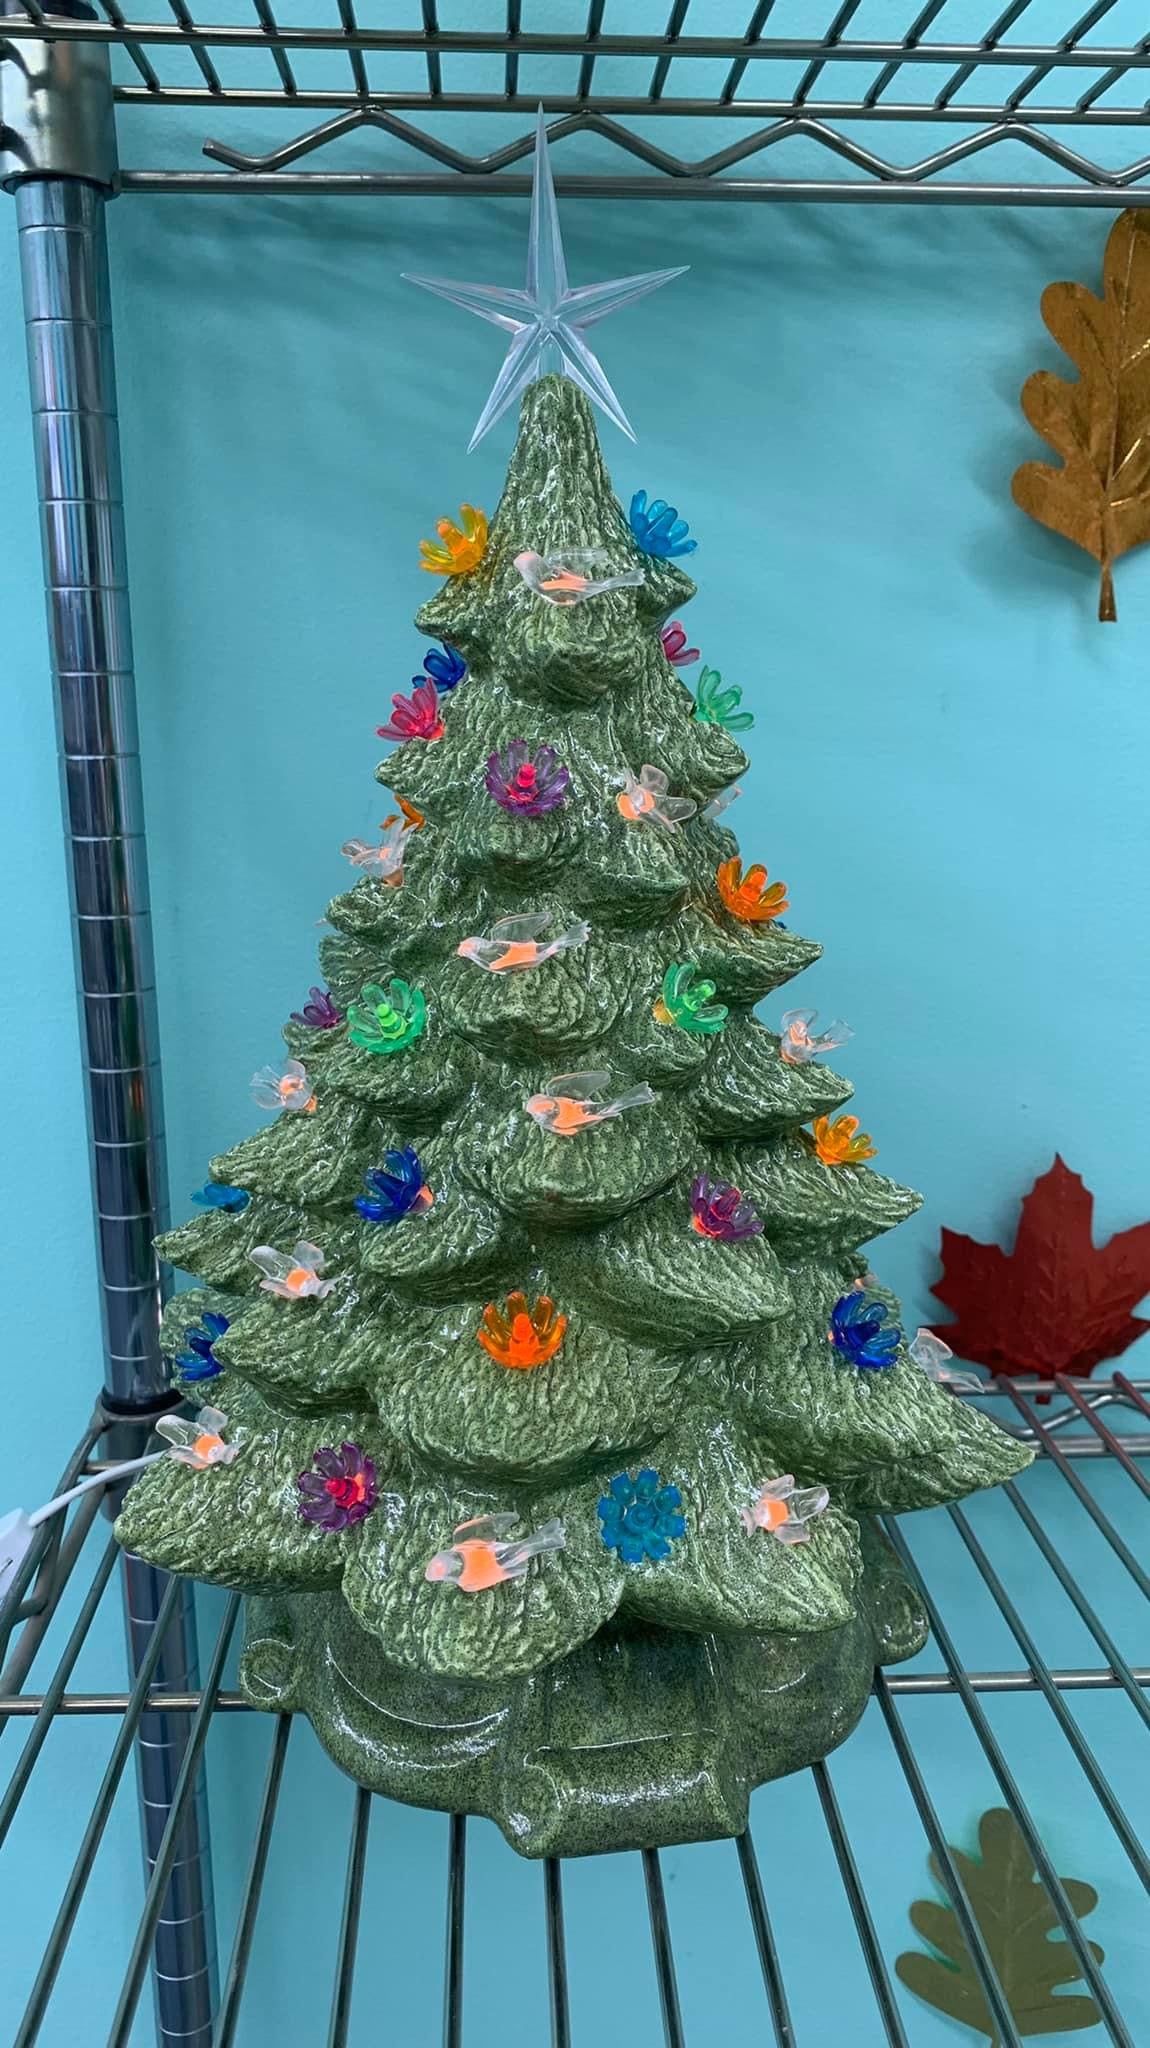 Green glazed Christmas tree 13" with flower and white bird pegs